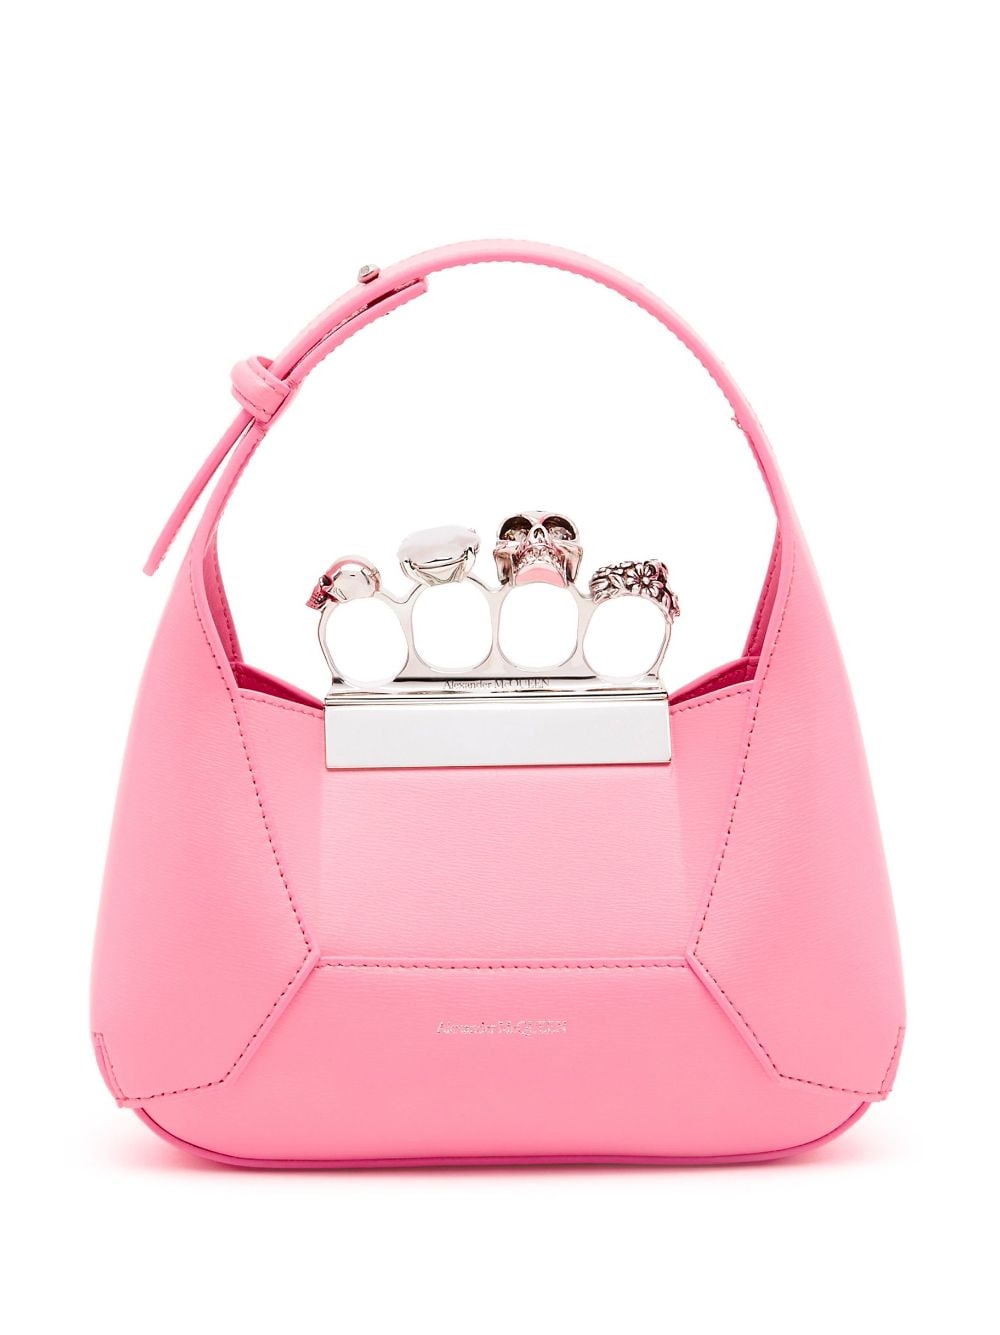 ALEXANDER MCQUEEN Mini Jeweled Hobo Leather Handbag in Flamingo Pink with Swarovski Crystals and Adjustable Straps